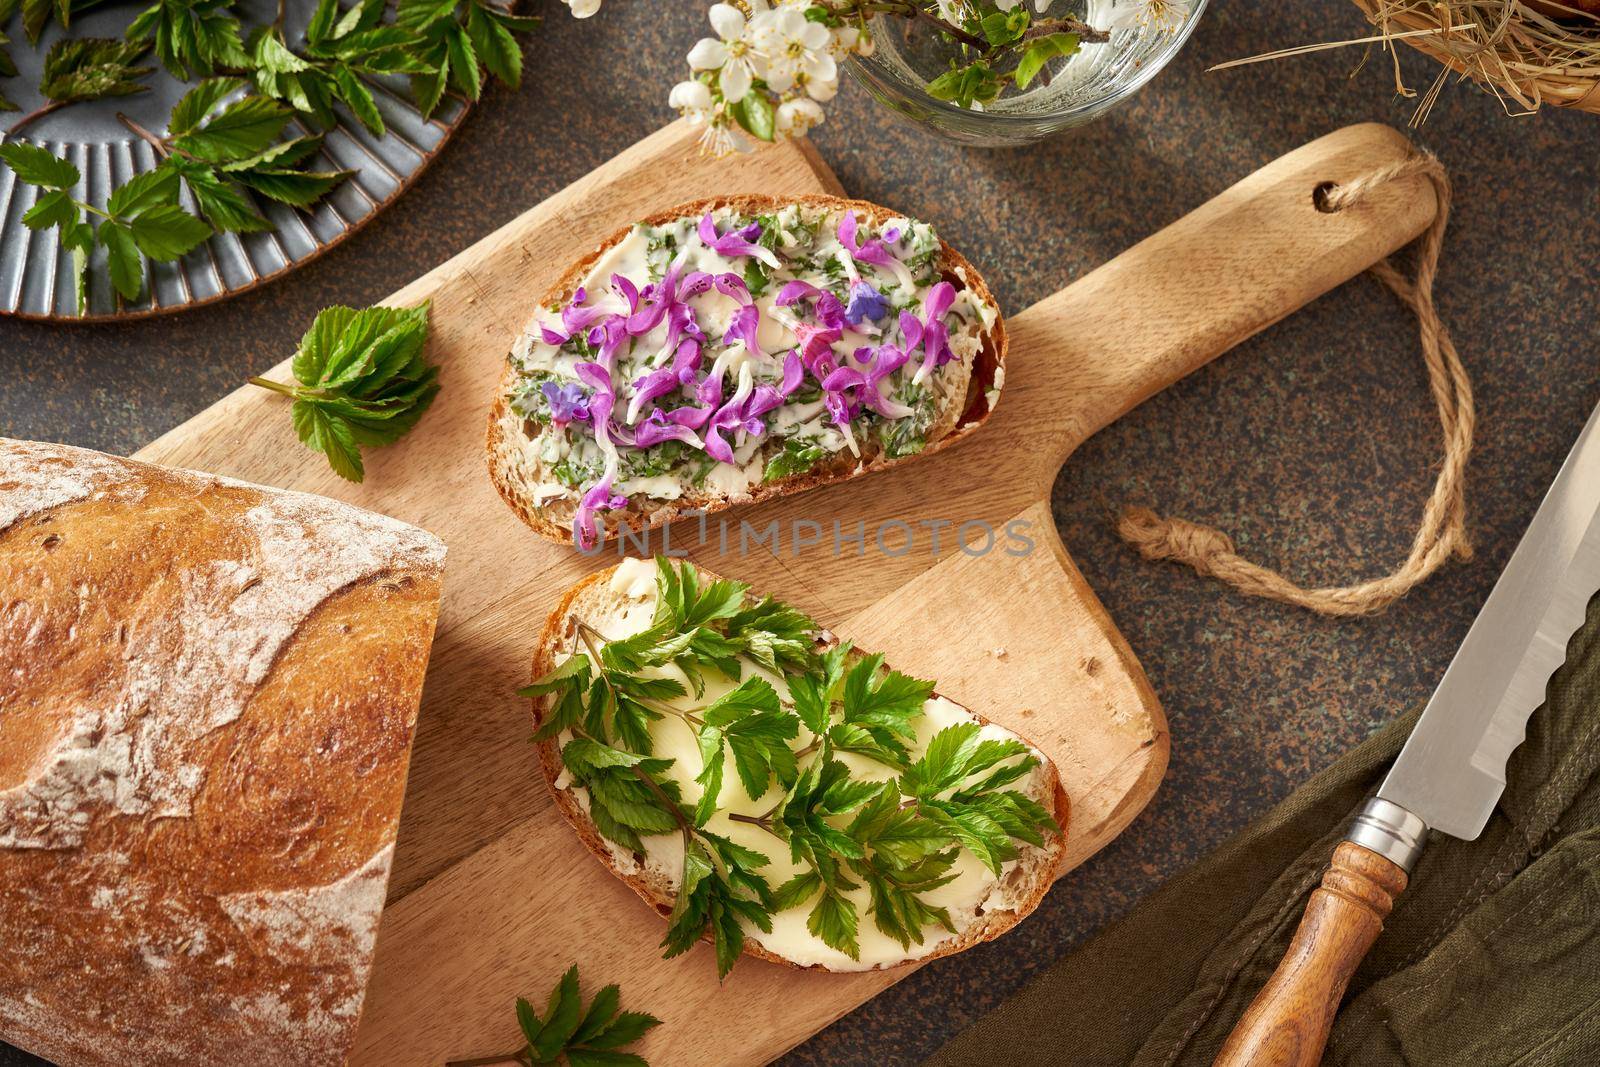 Sourdough bread with wild edible spring plants - young goutweed leaves, purple dead-nettle and lungwort flowers by madeleine_steinbach